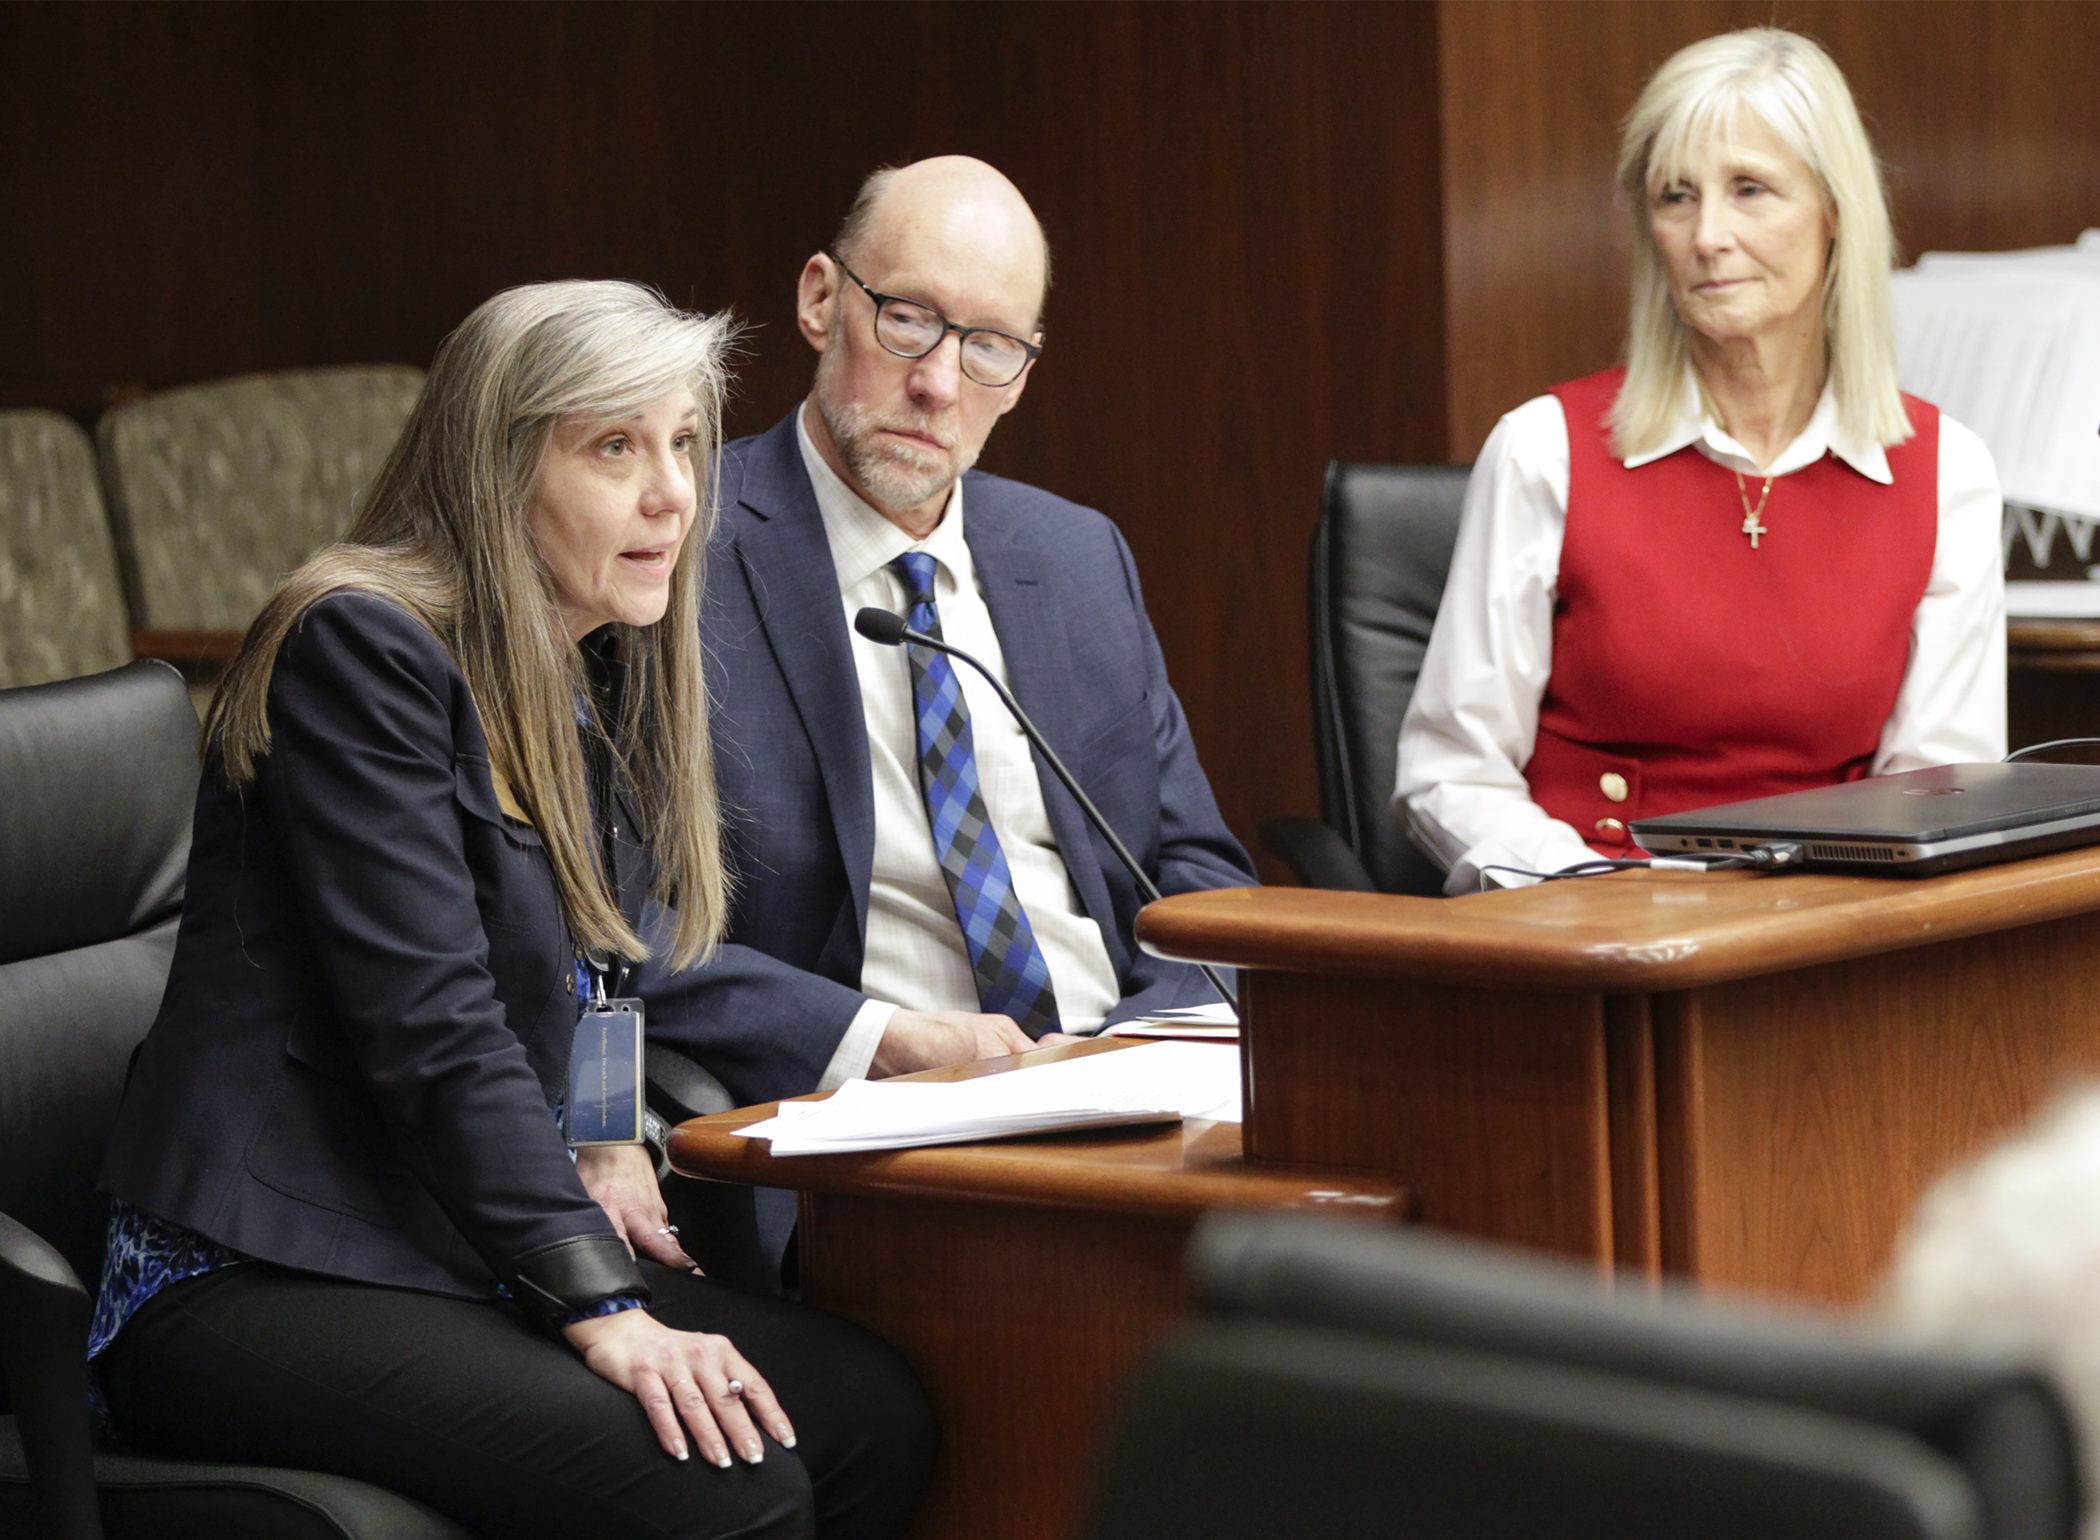 Cheryl Polzin, treasurer of the Wayzata School Board, testifies on HF521, sponsored by Rep. Jim Davnie, center, to appropriate an unspecified amount of state bond proceeds to fund another round of school safety grants. Photo by Paul Battaglia